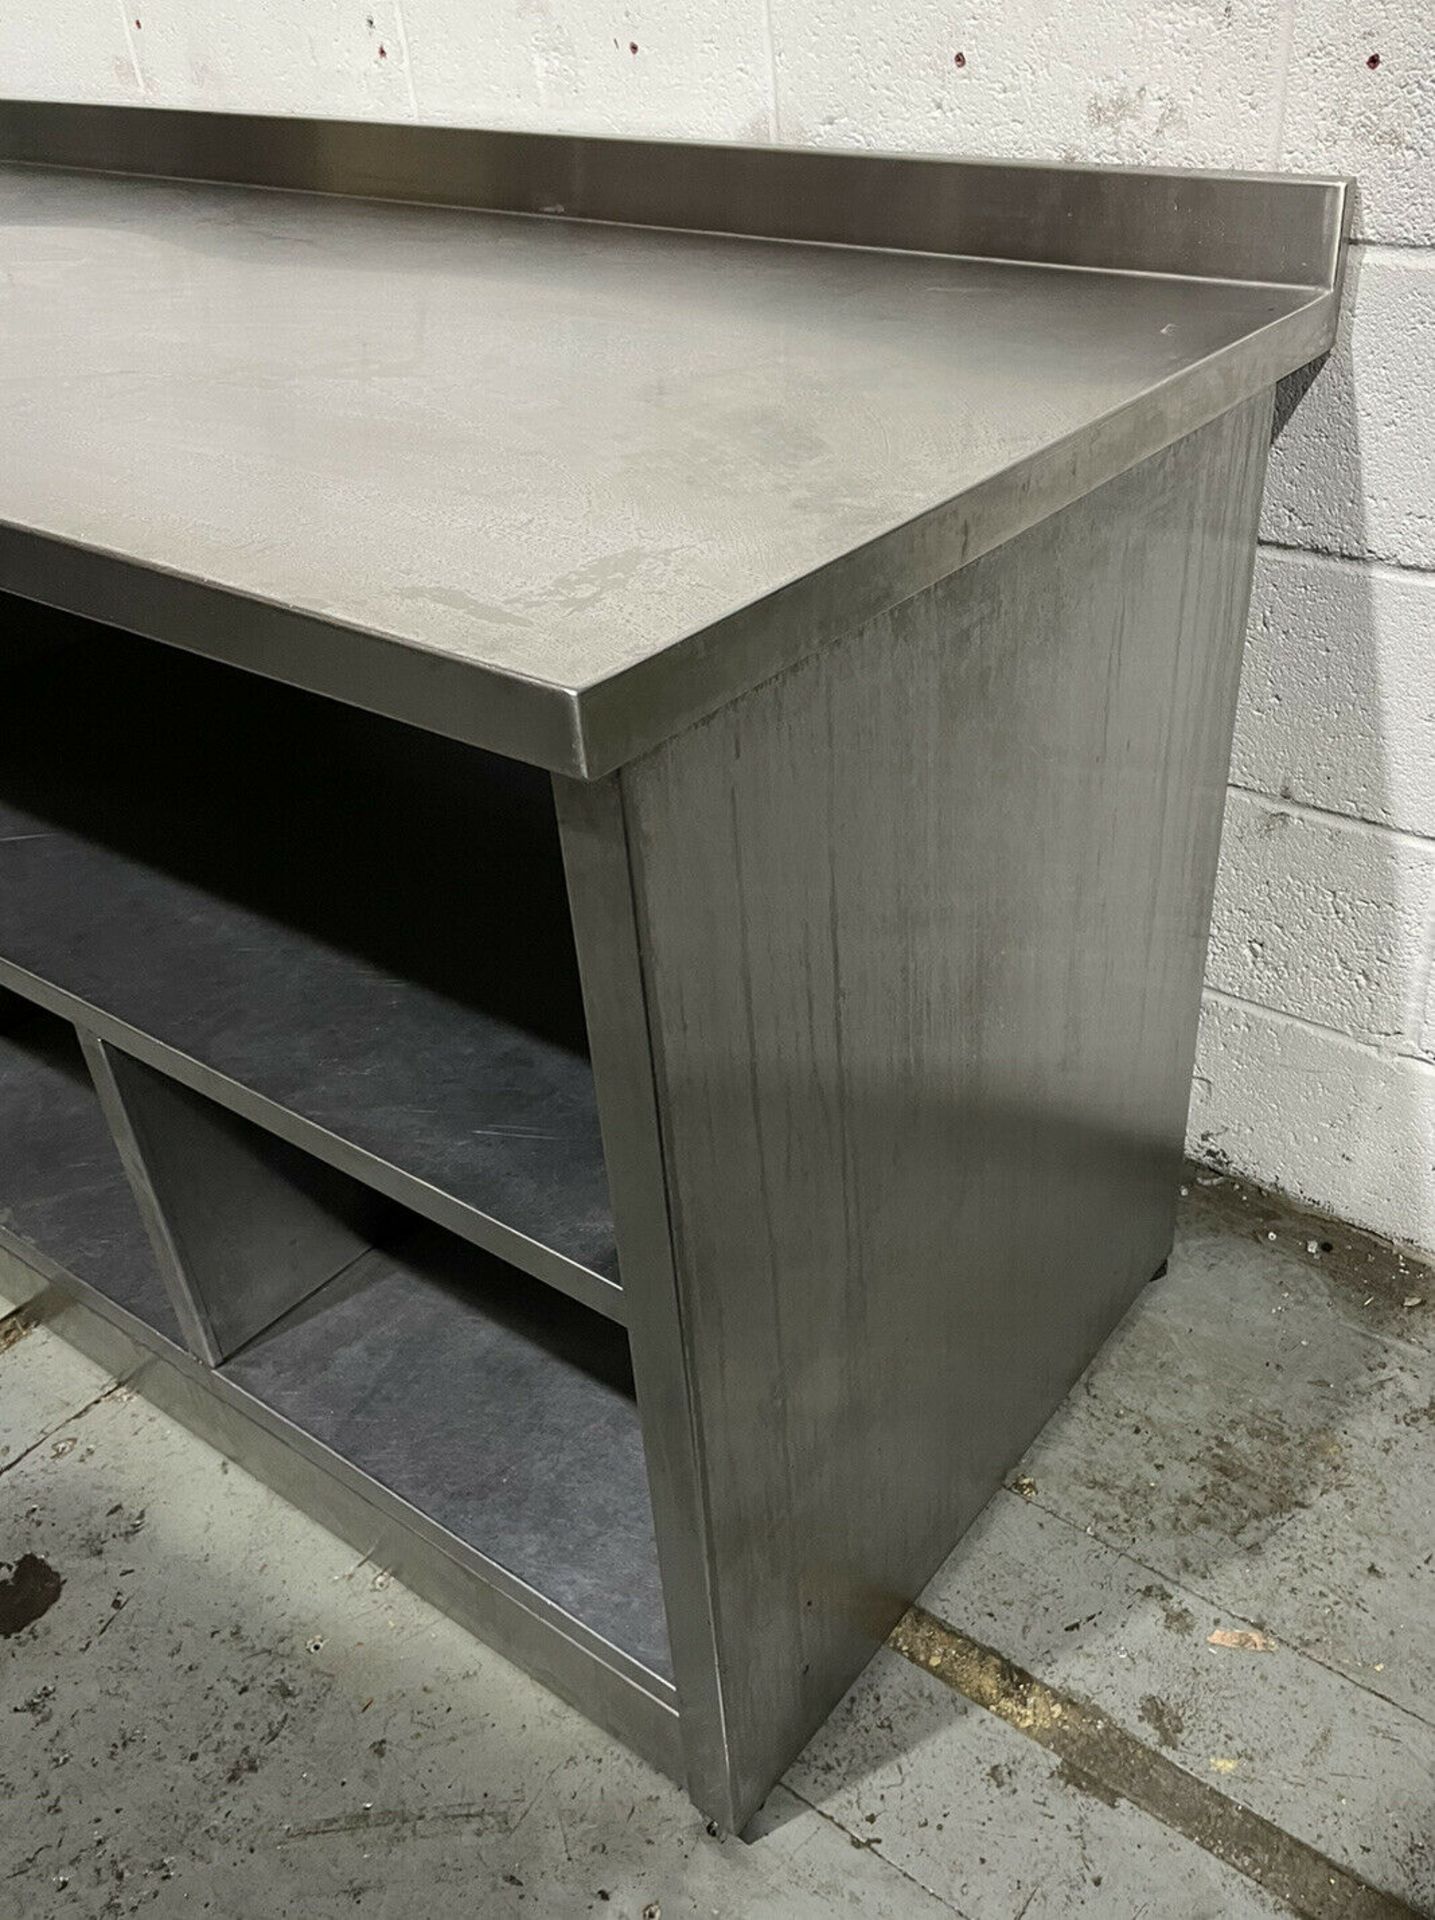 Stainless Steel Preperation Unit with Shelves - Image 6 of 6